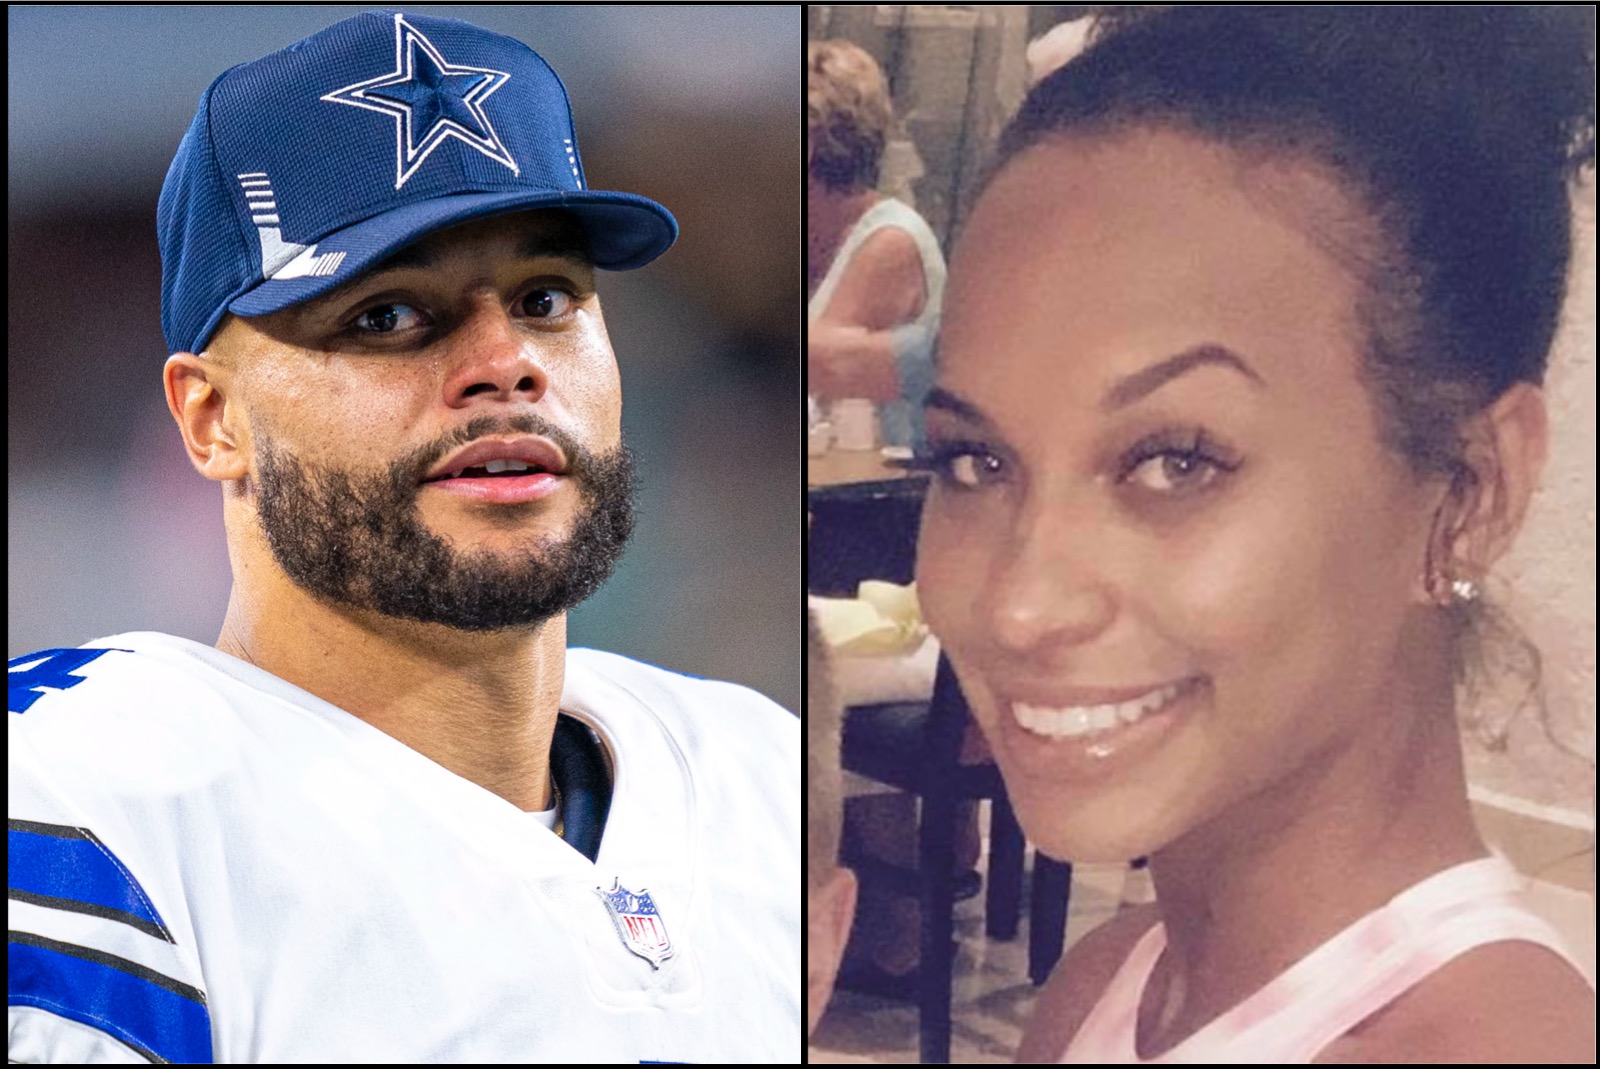 Photos of Victoria Baileigh Shores Who is Being Sued By Dak Prescott After She Asked For $100 Million